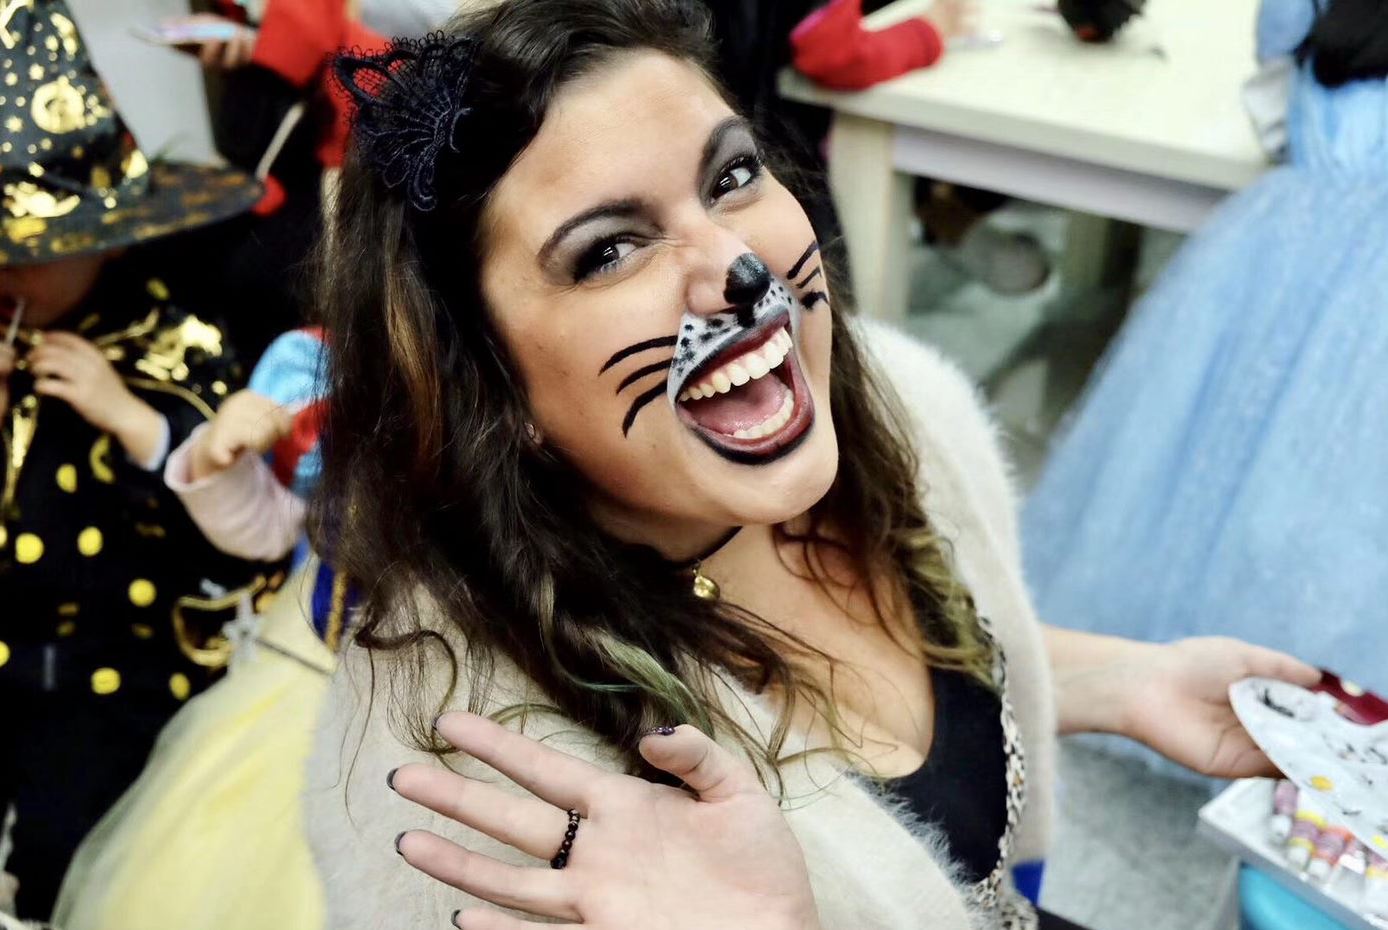 Ms. Annie Wall with her face painted like a cat